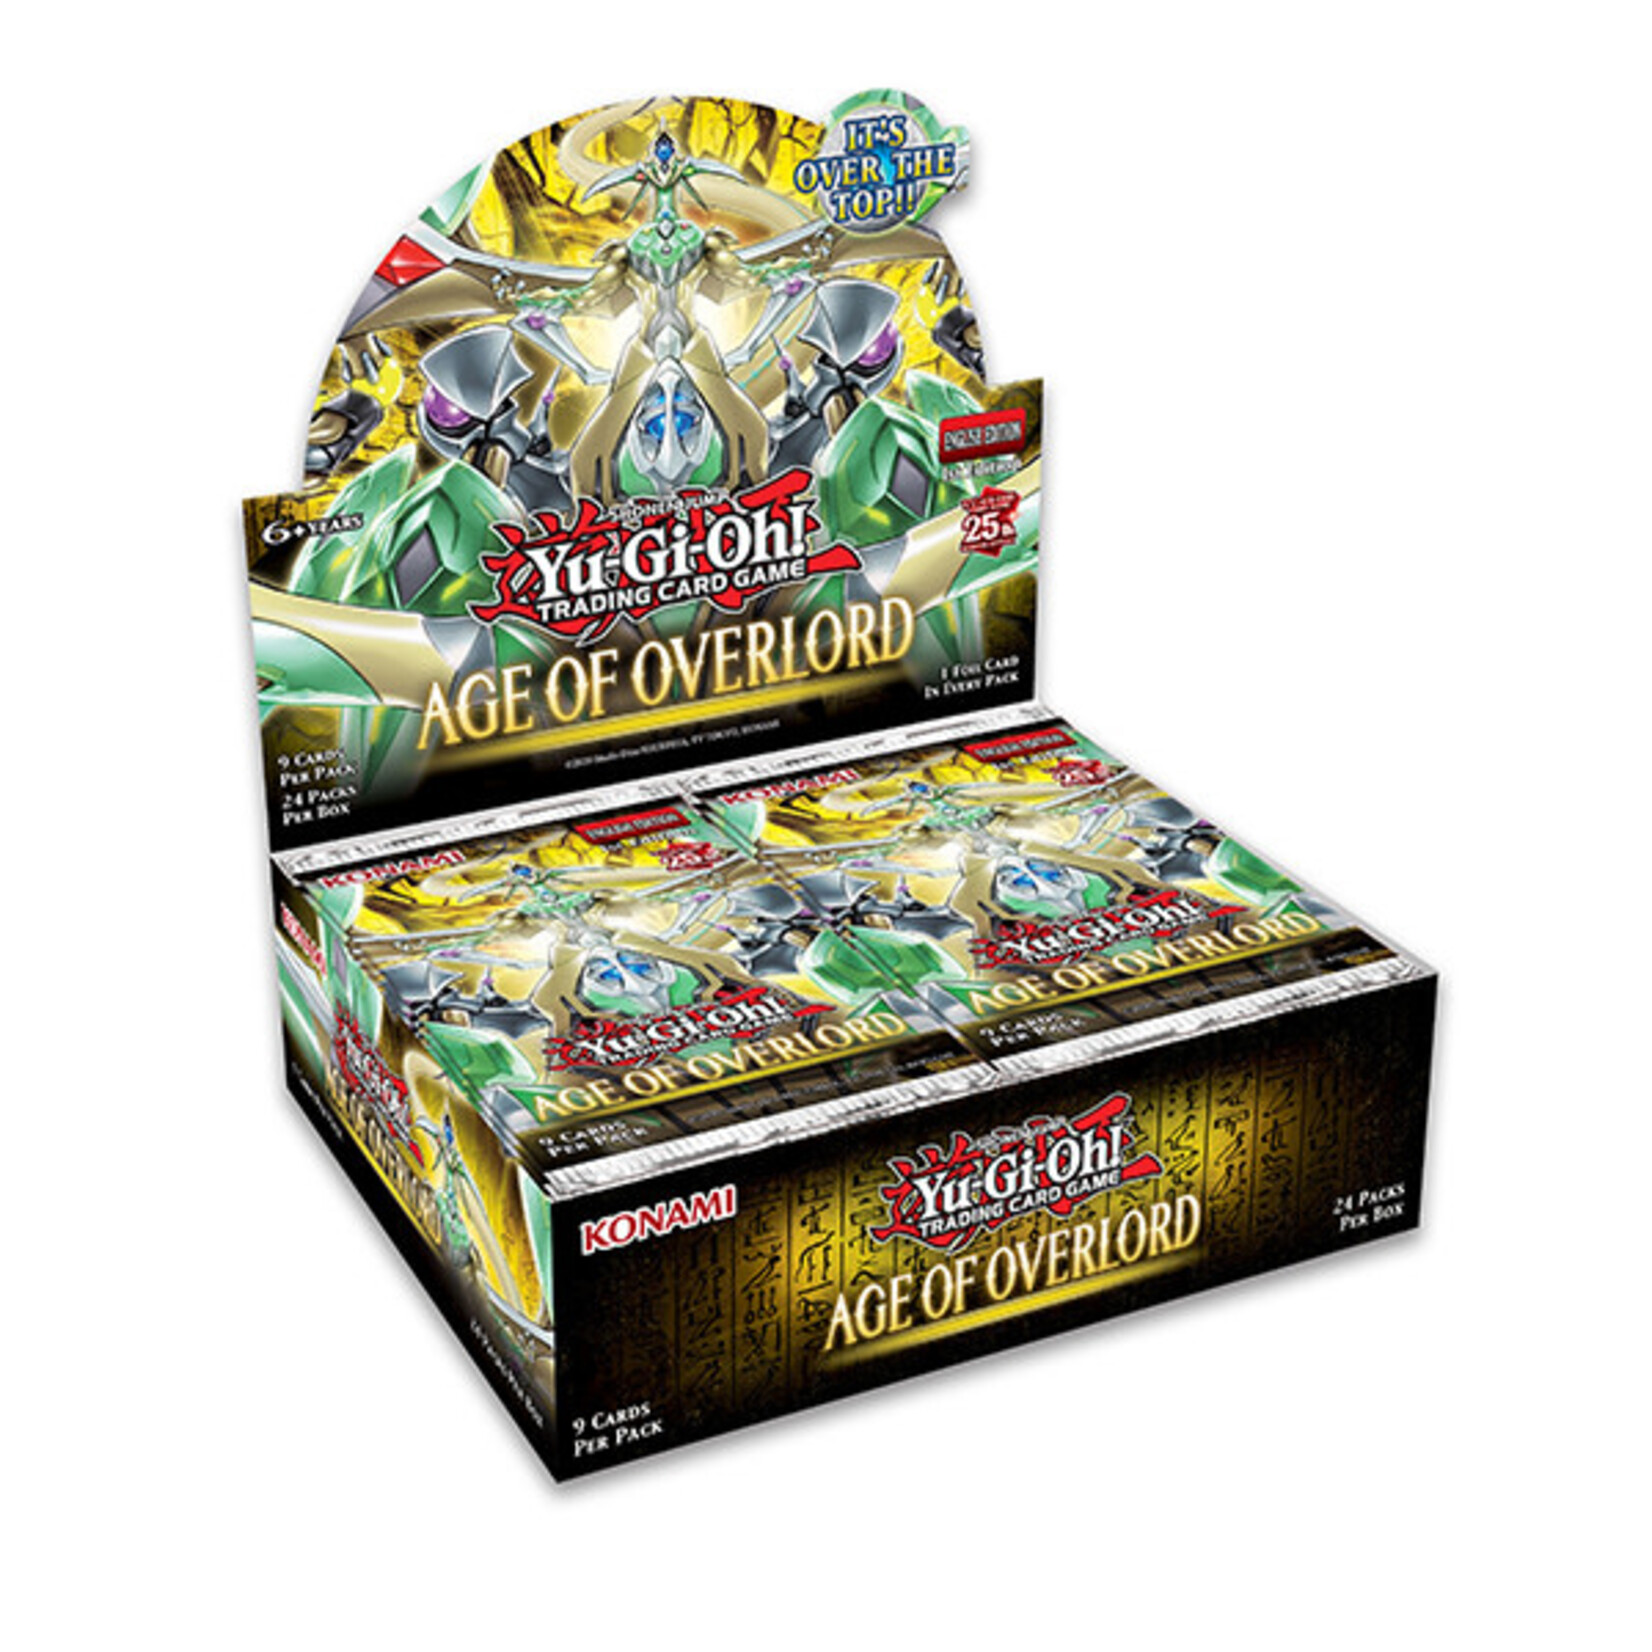 Konami Yugioh - Age of Overlord Booster Box